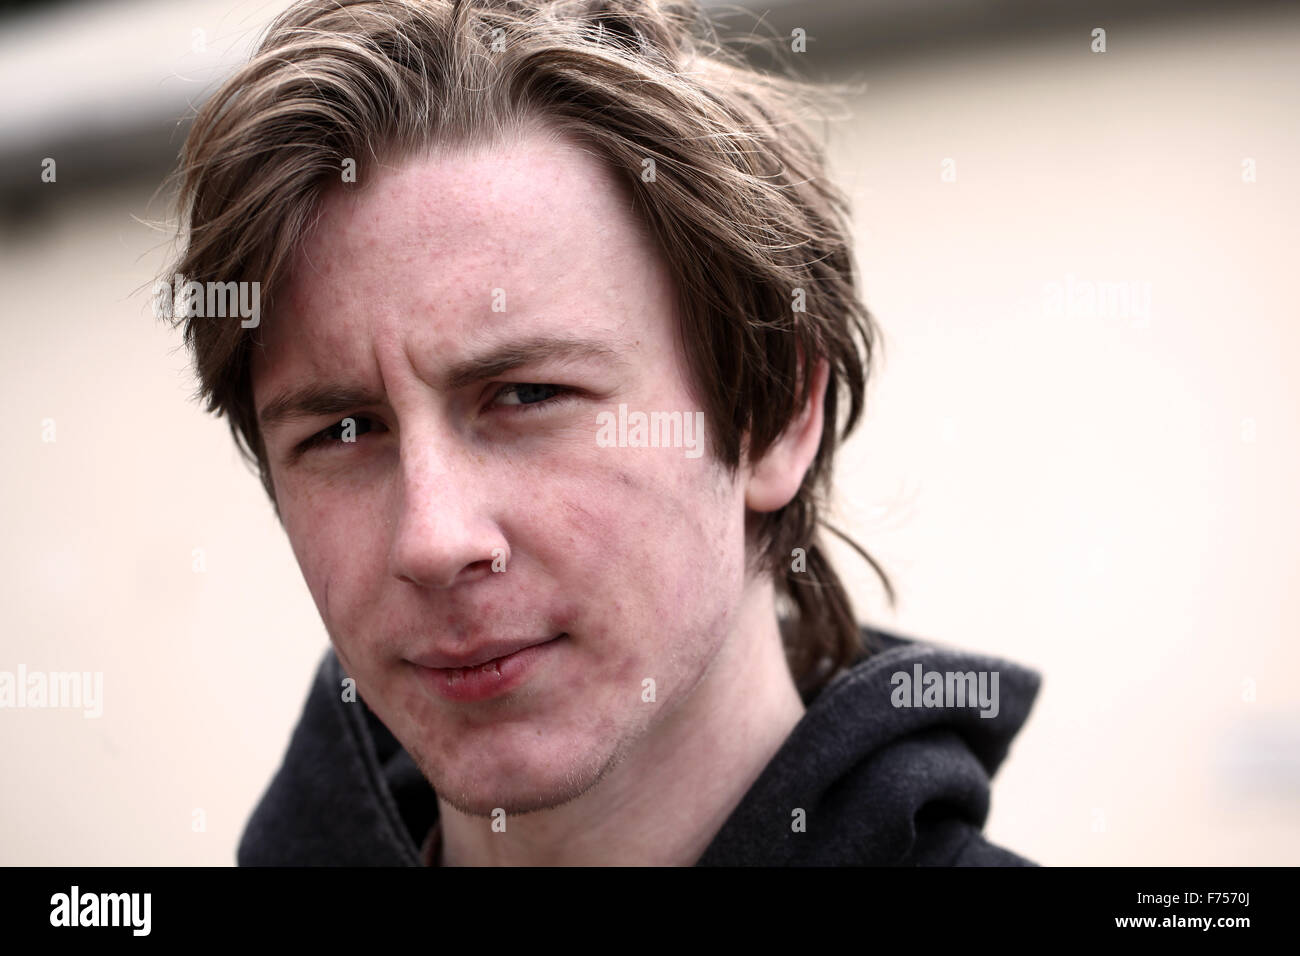 weather beaten face of a young man in his late teens or early twenties. Stock Photo